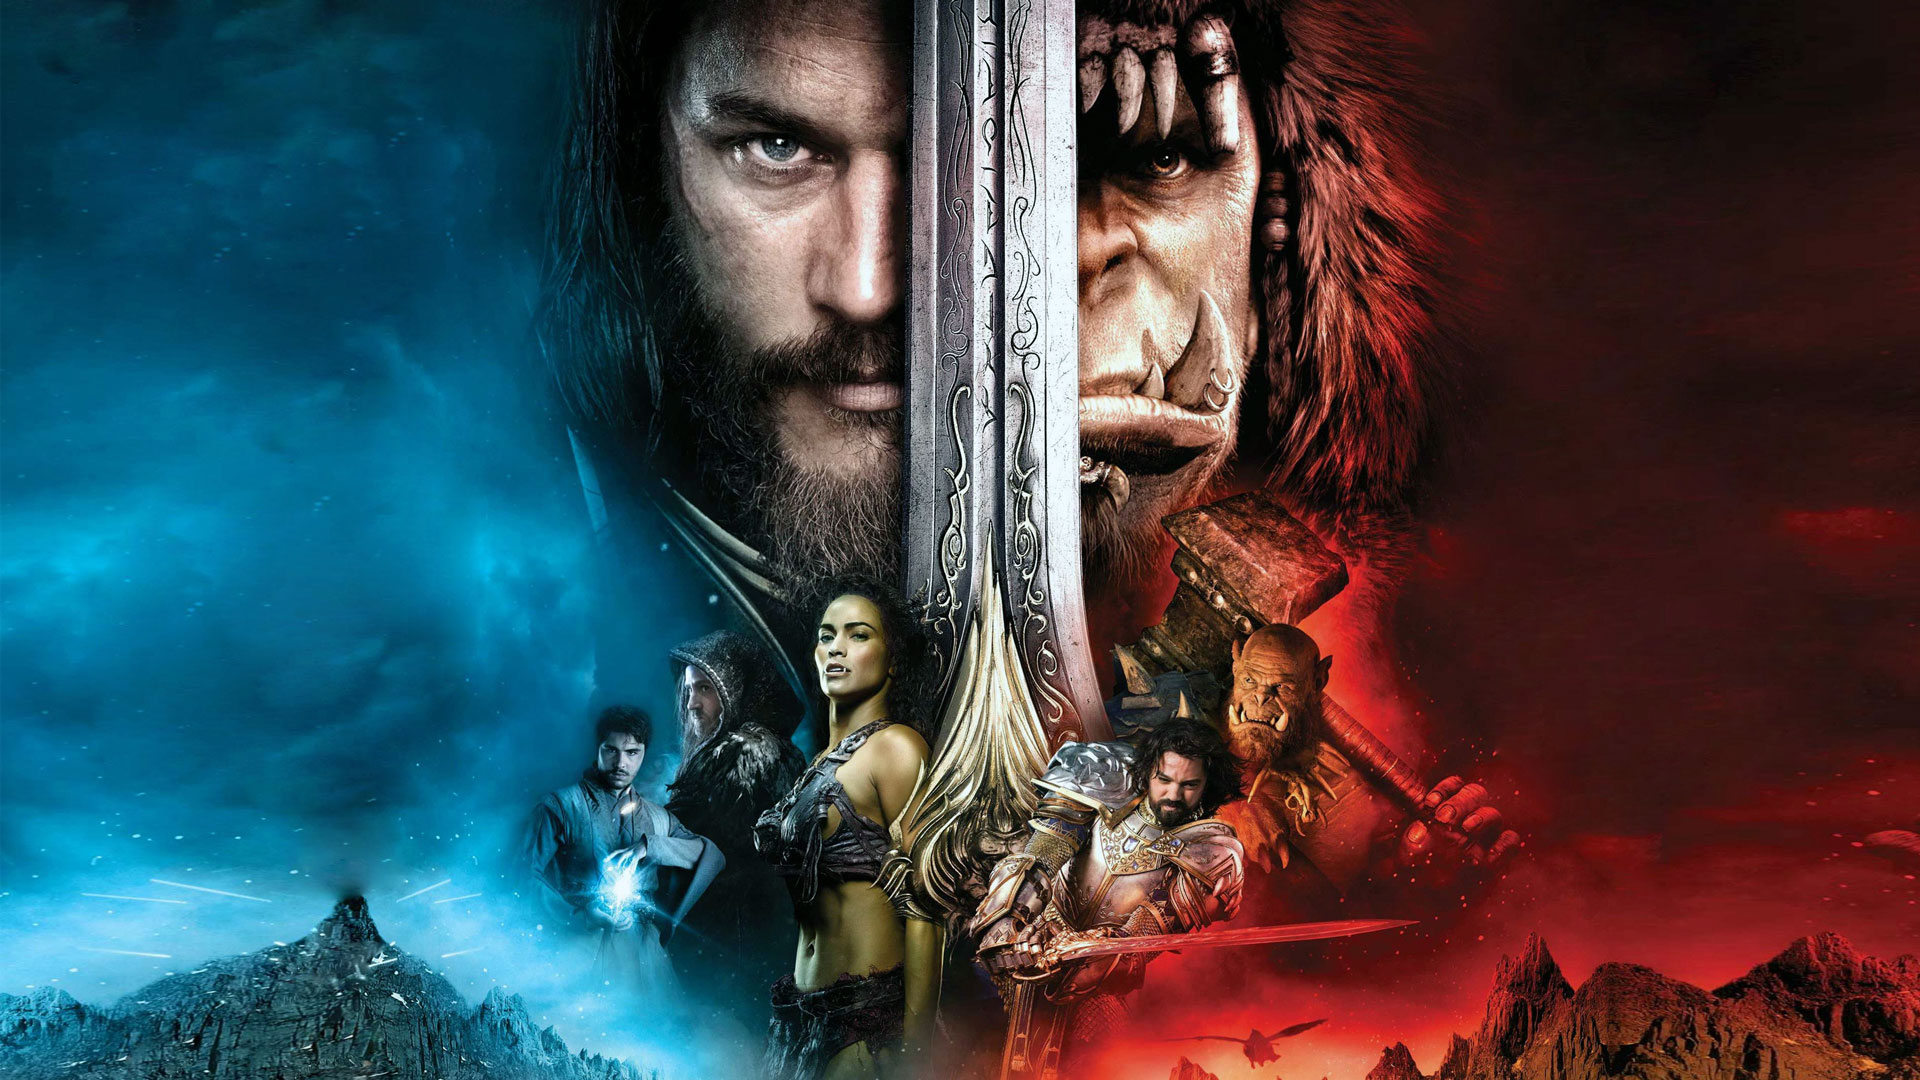 Free photo The screensaver from the movie warcraft